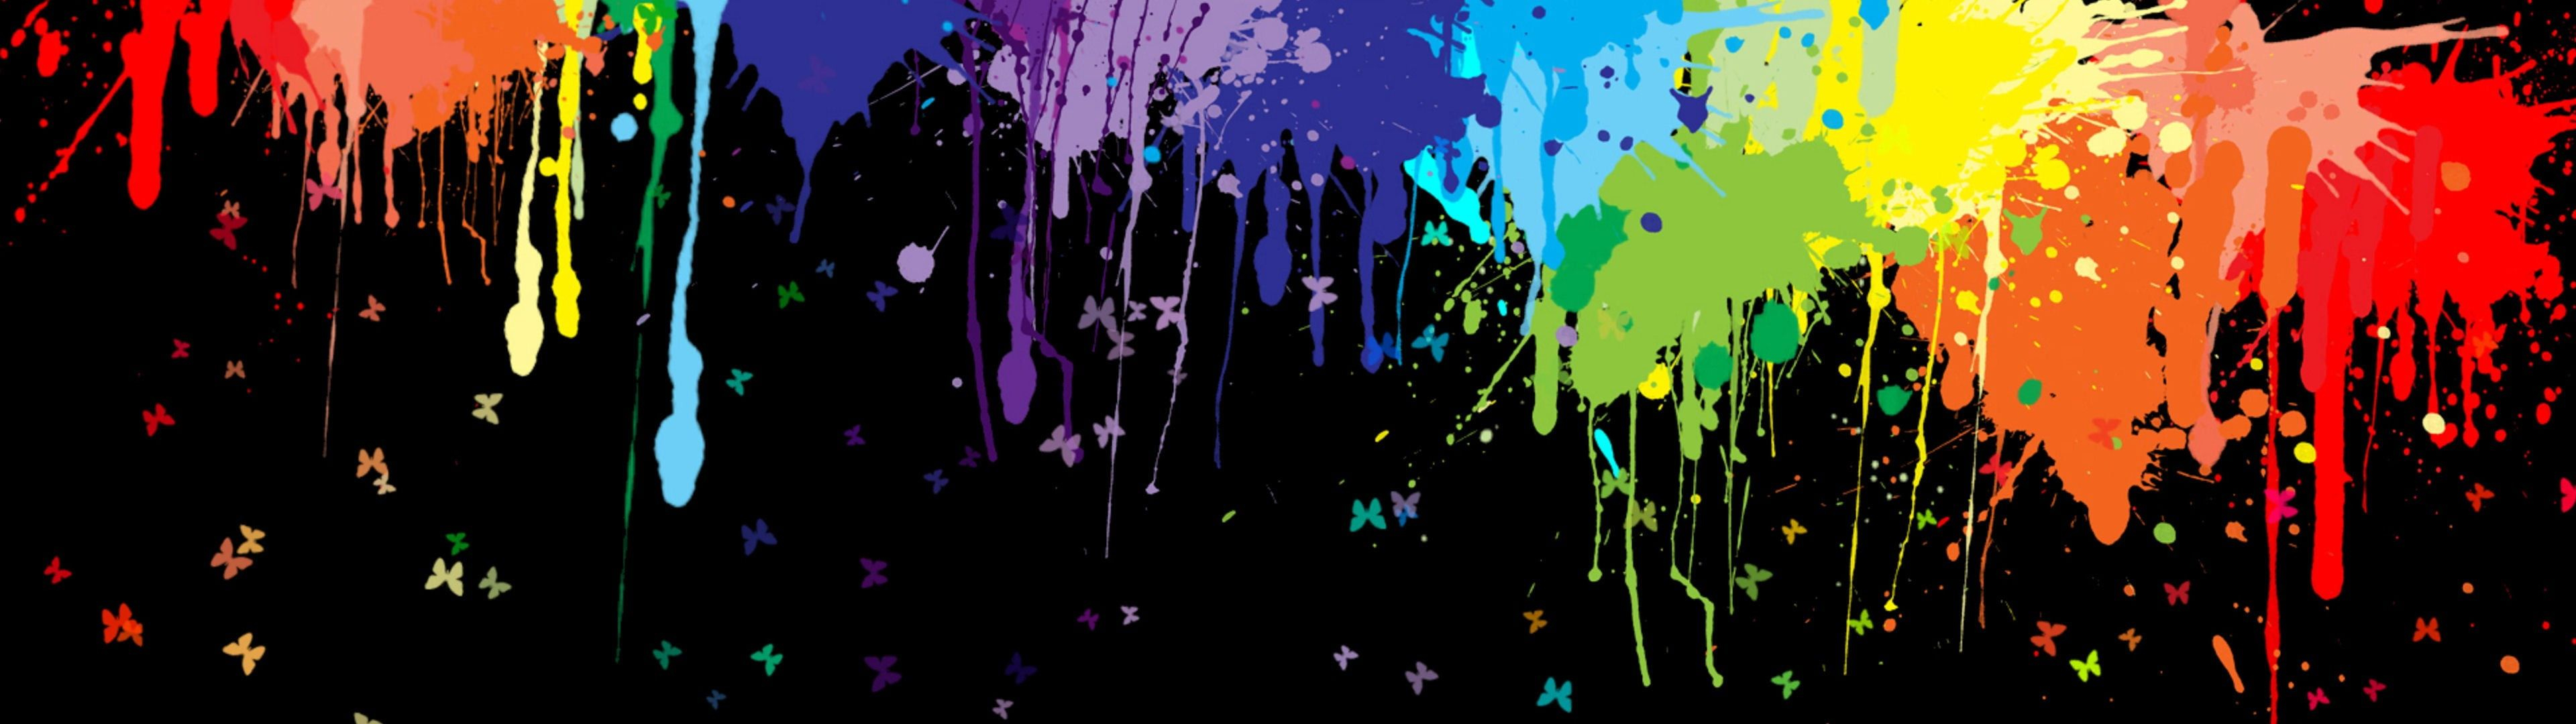 3840x1080 red, blue, purple, and green splash paint artwork paint splatter #colorful multiple display #butterfly #artwork #4K&acirc;&#128;&brvbar; | Pink abstract painting, Painting, Red artwork